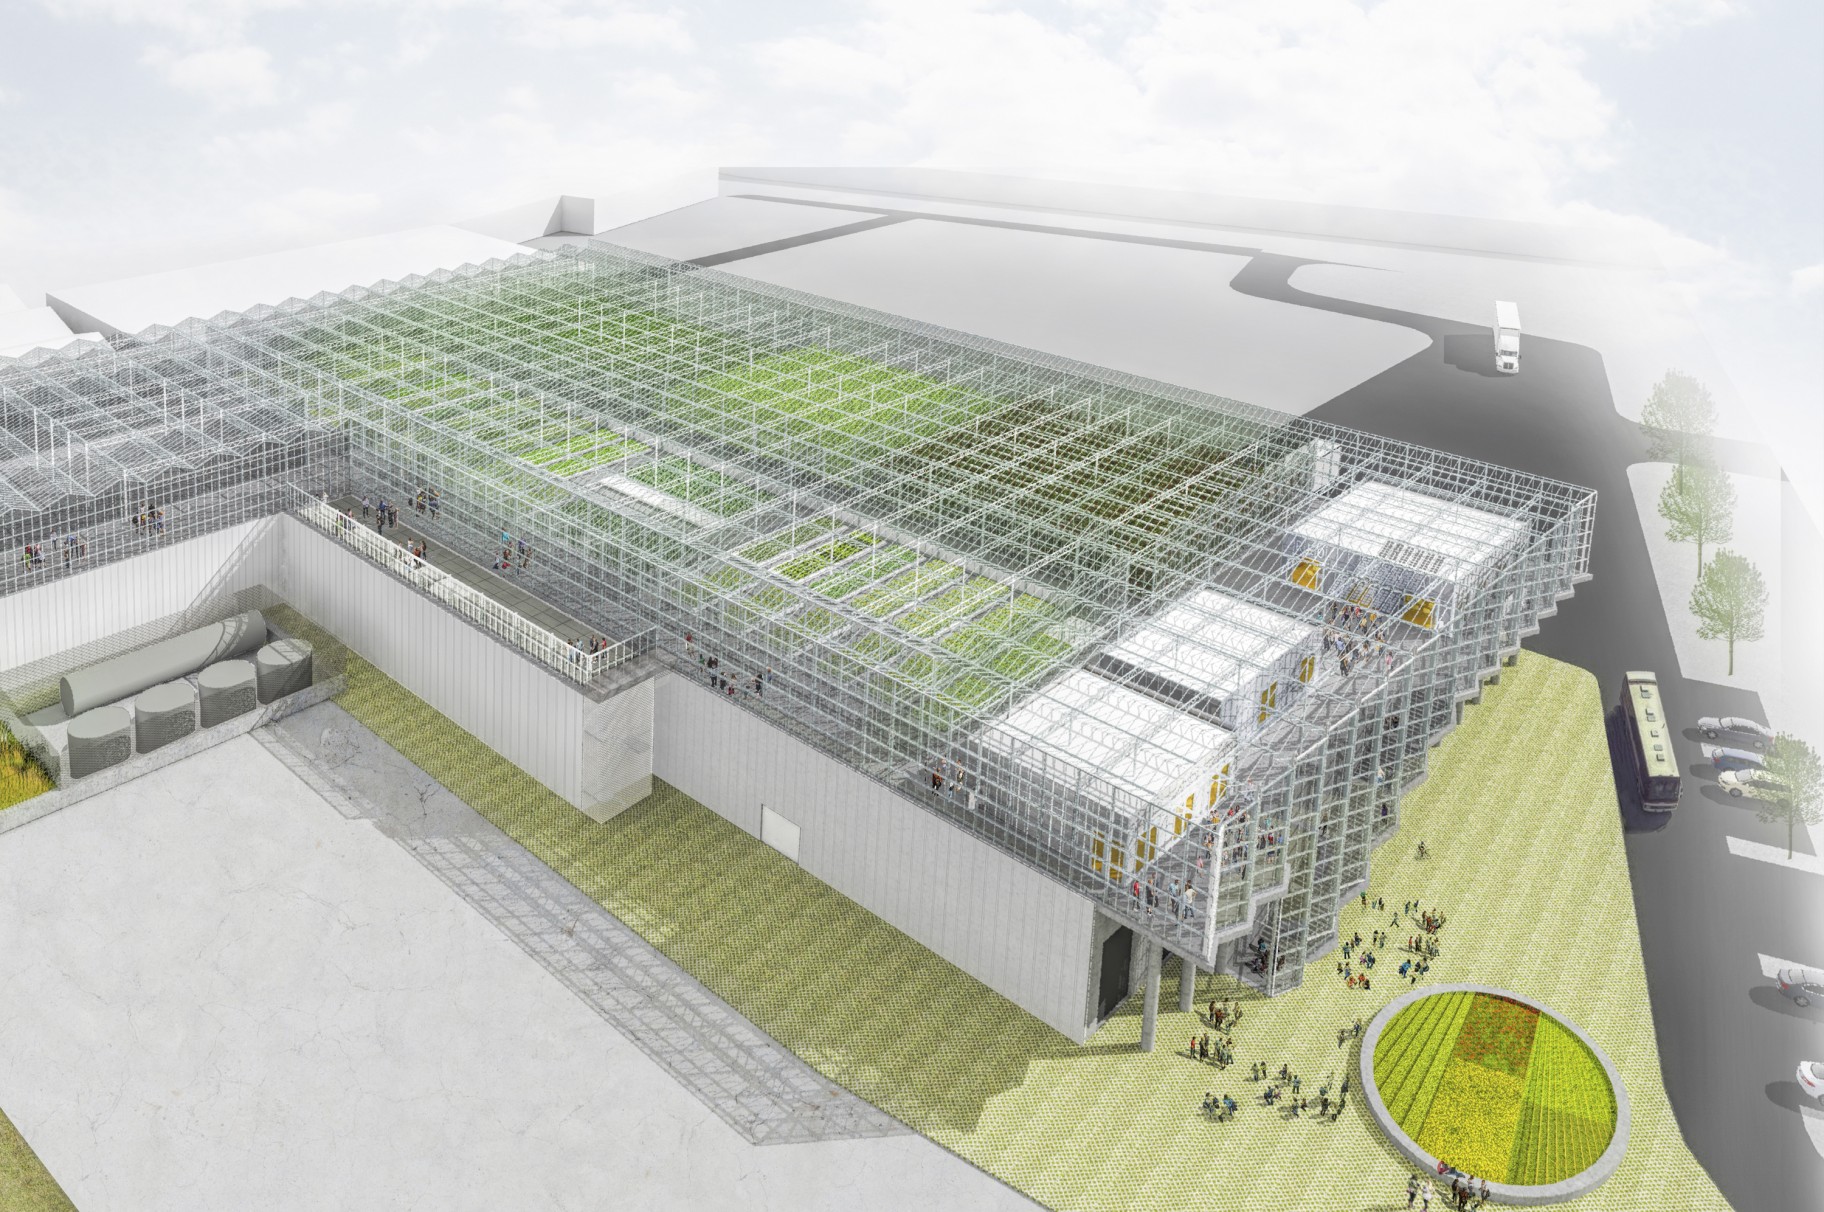 Agrotopia rooftop greenhouse from META and Van Bergen Kolpa as a case study during the EU Greenweek